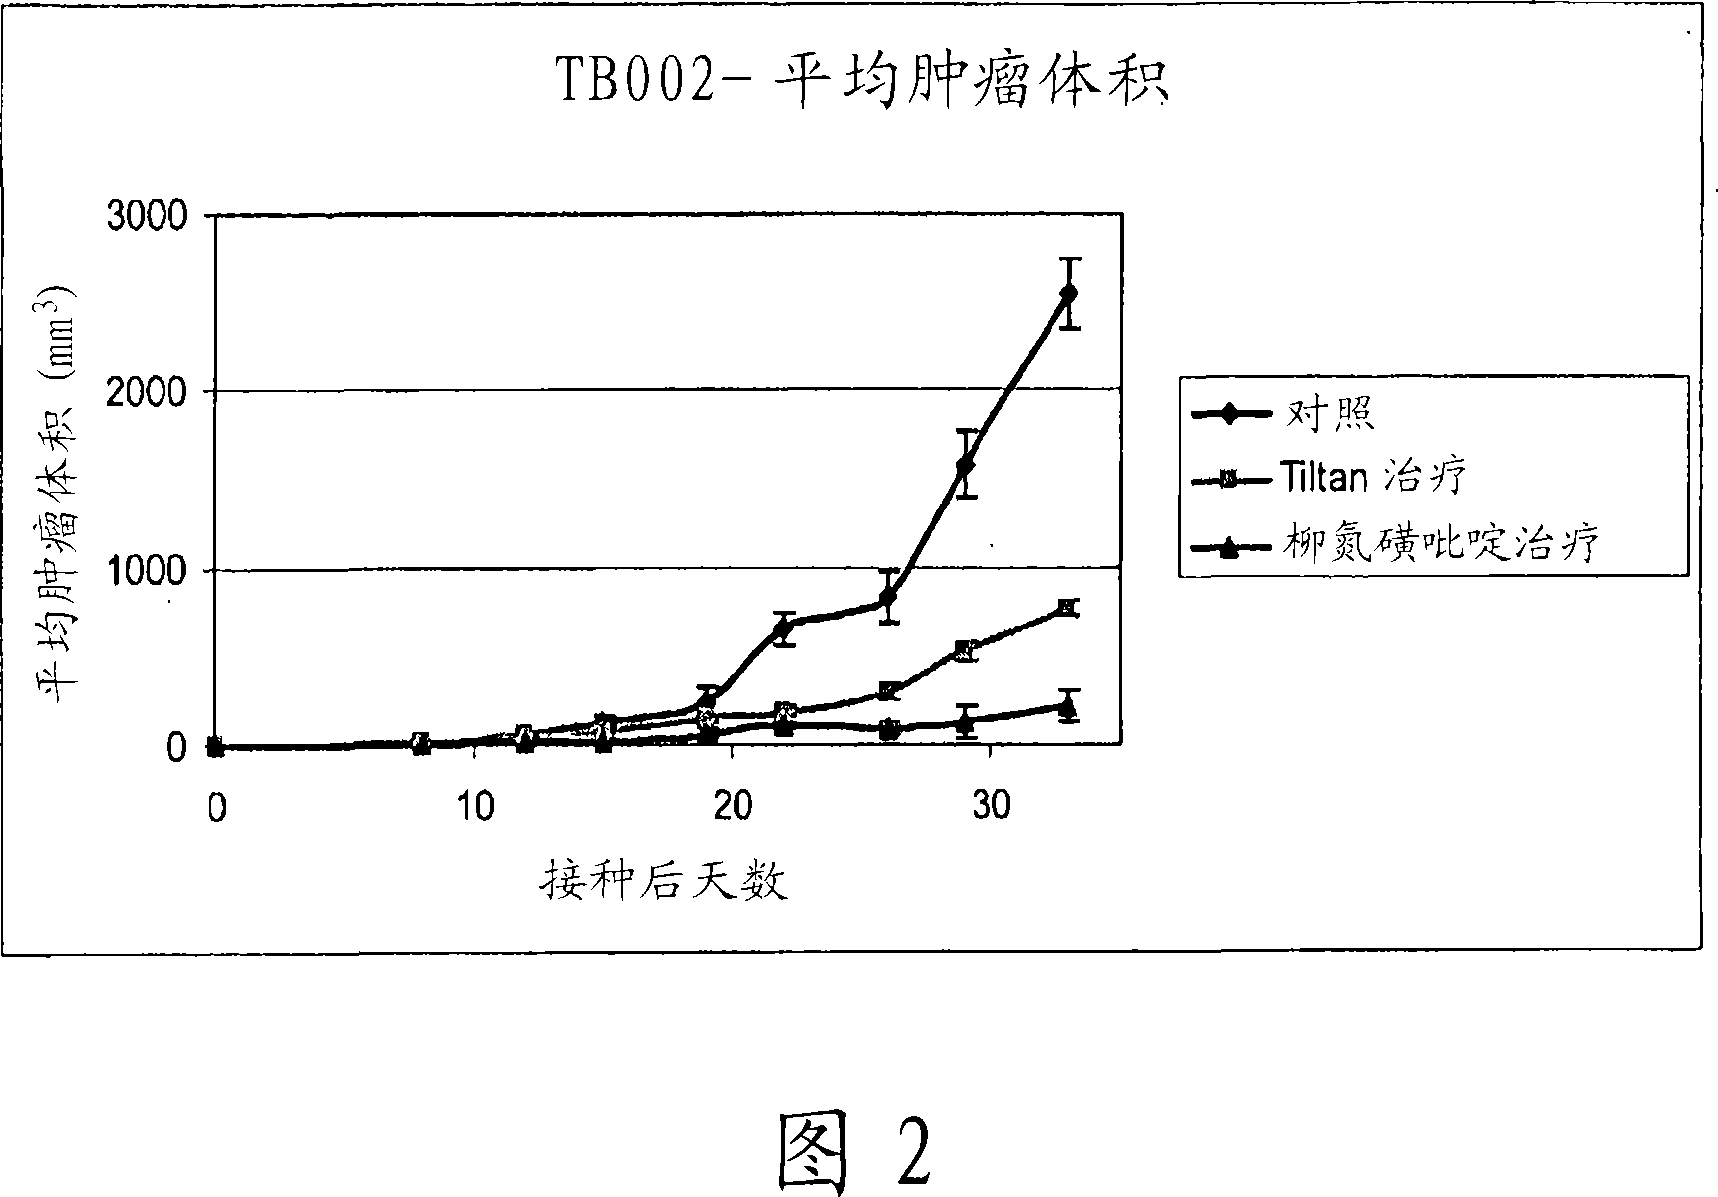 Method and composition for enhancing anti-angiogenic therapy